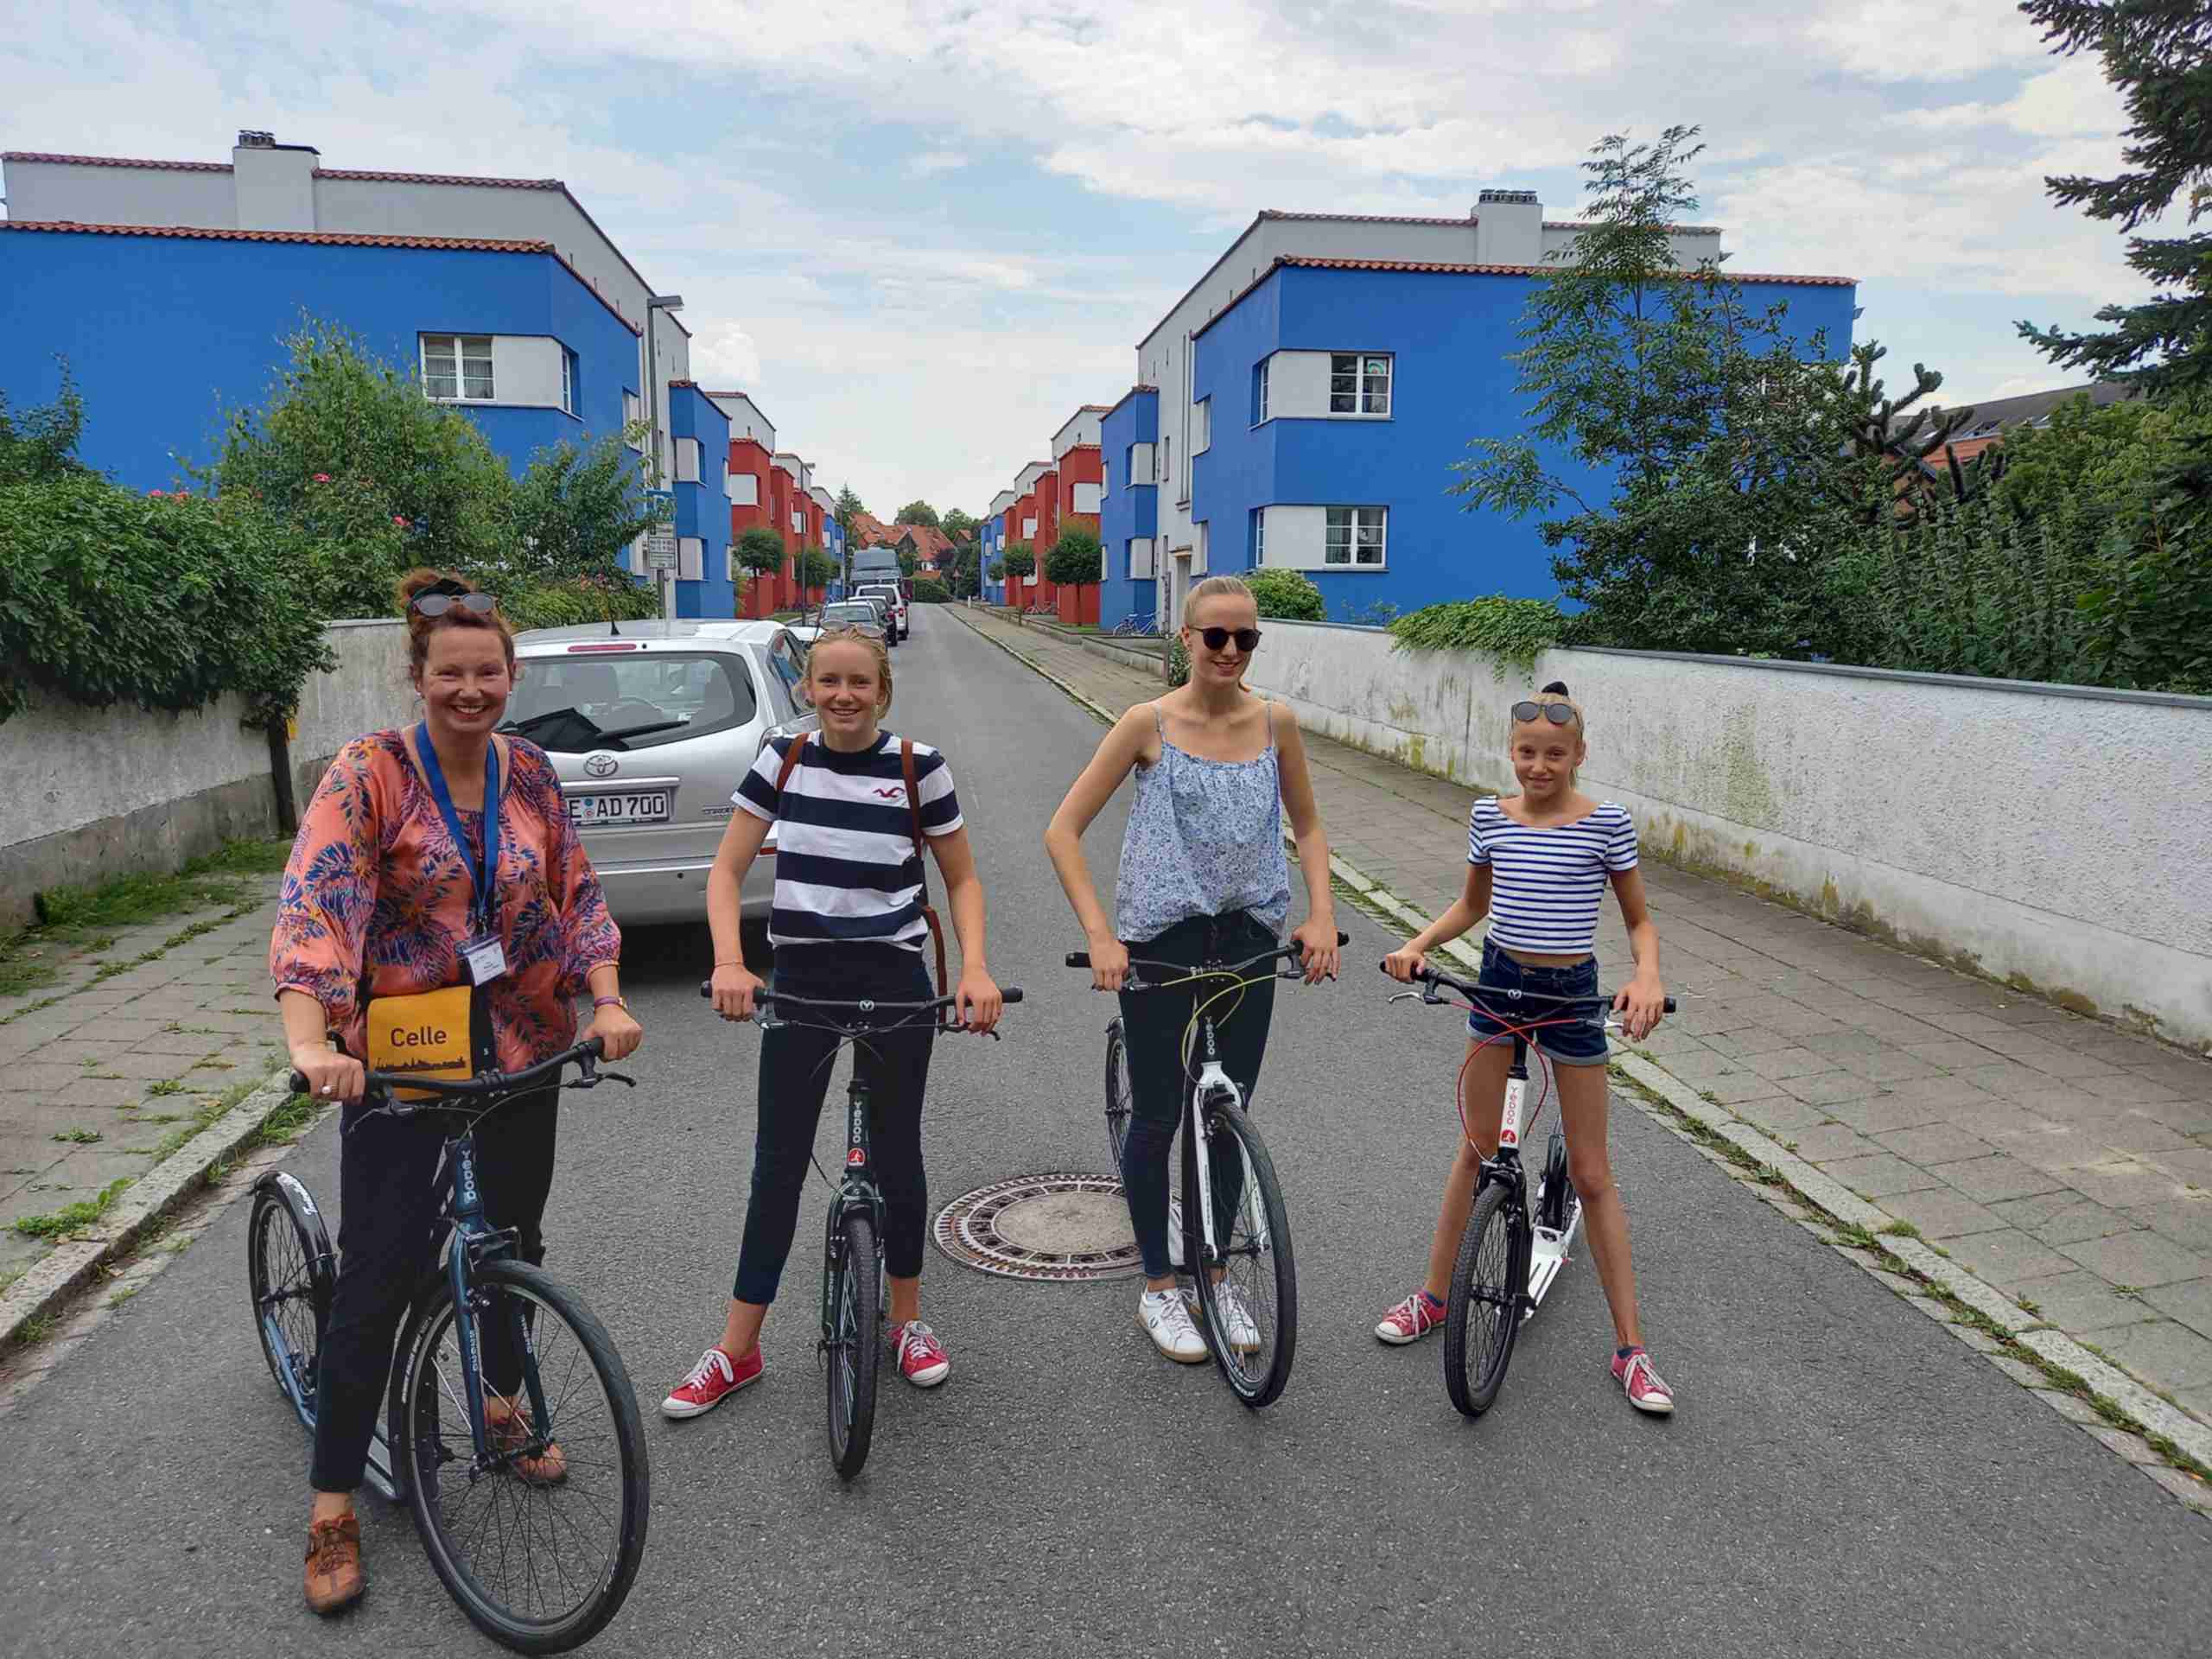 Discover Celle by Pedal scooter